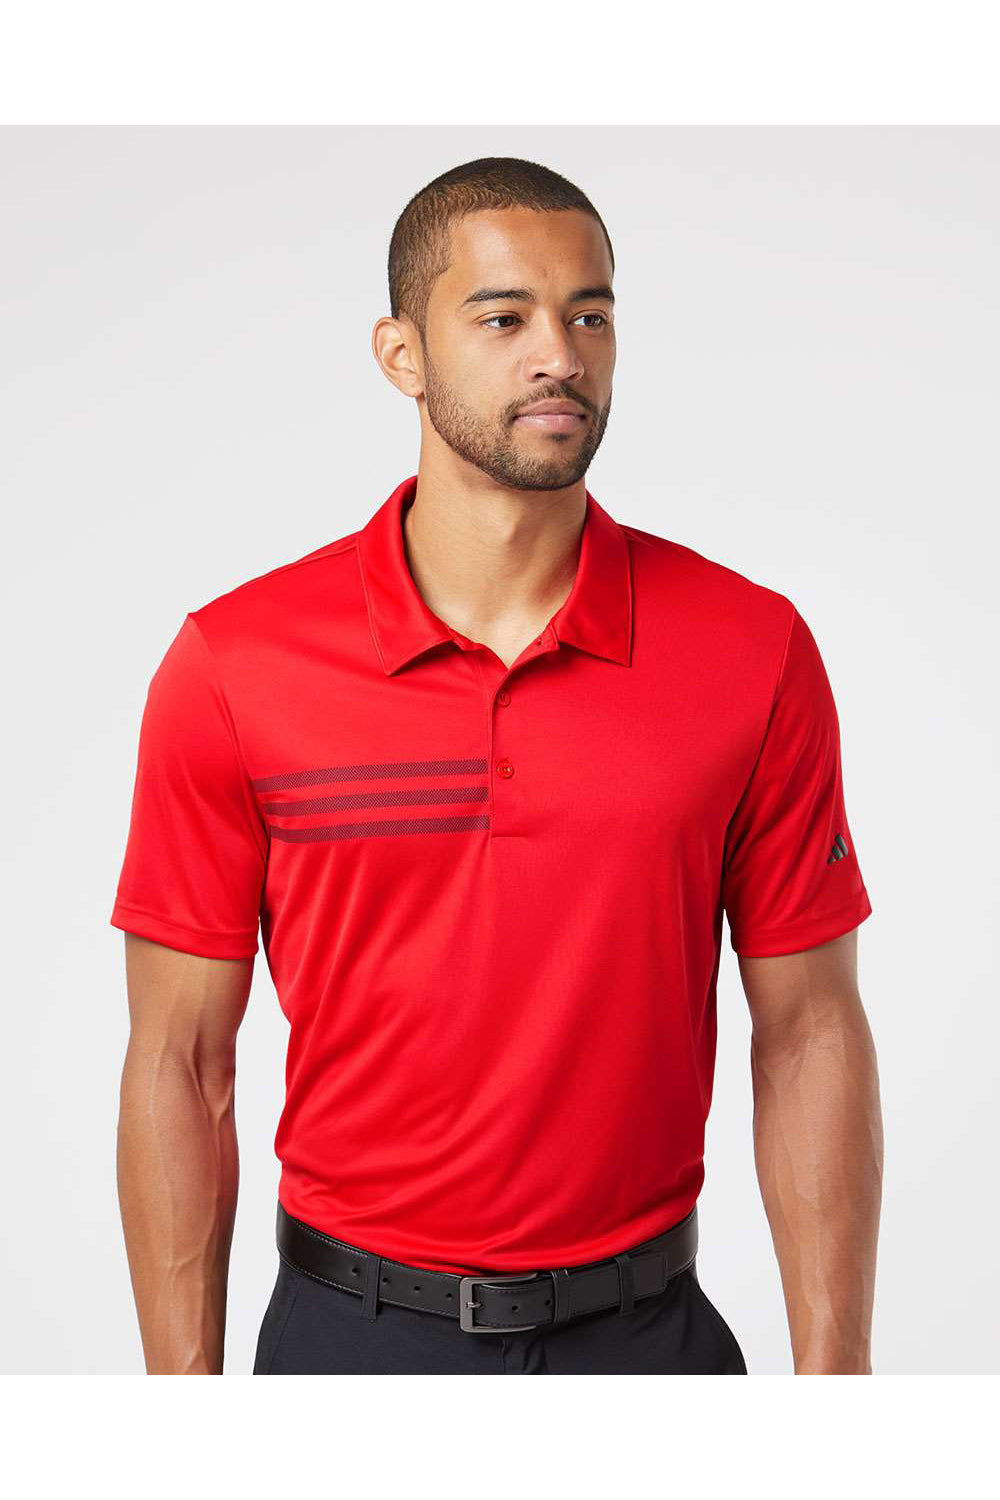 Adidas A324 Mens 3 Stripes Short Sleeve Polo Shirt Collegiate Red/Black Model Front